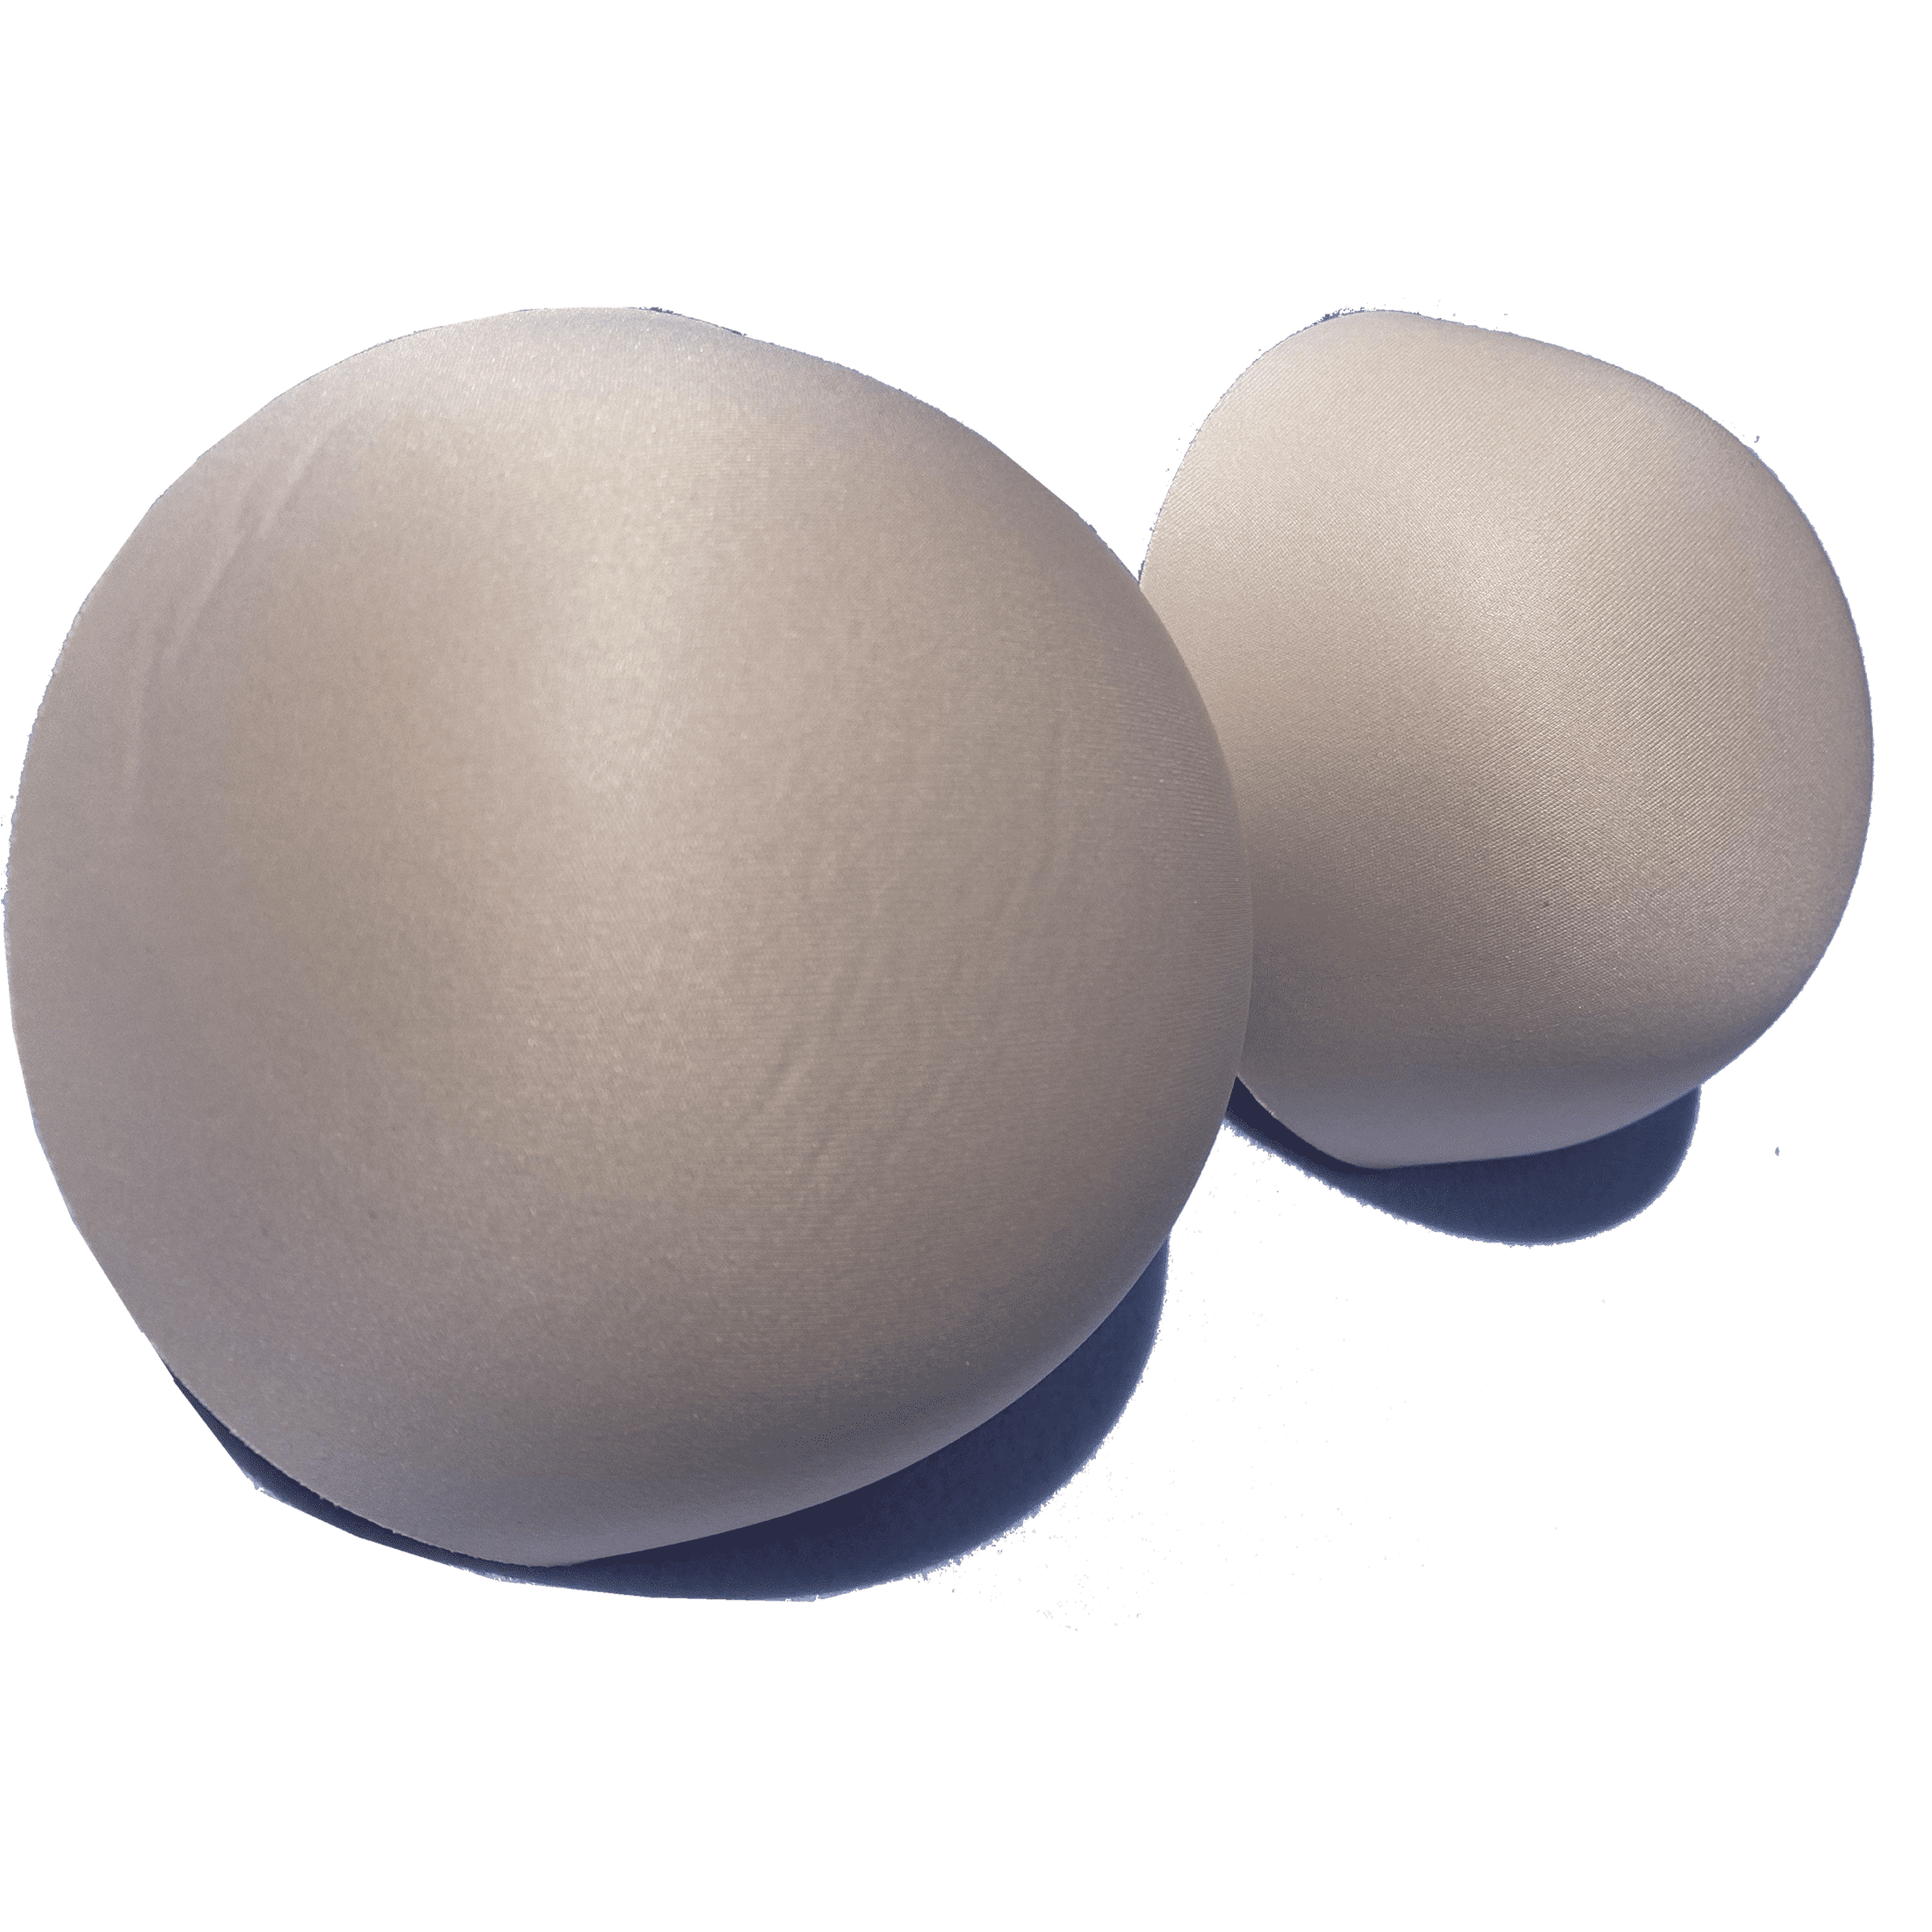 BIMEI Round Soft Bra Inserts Pads A Pair for Sports Bras Women's